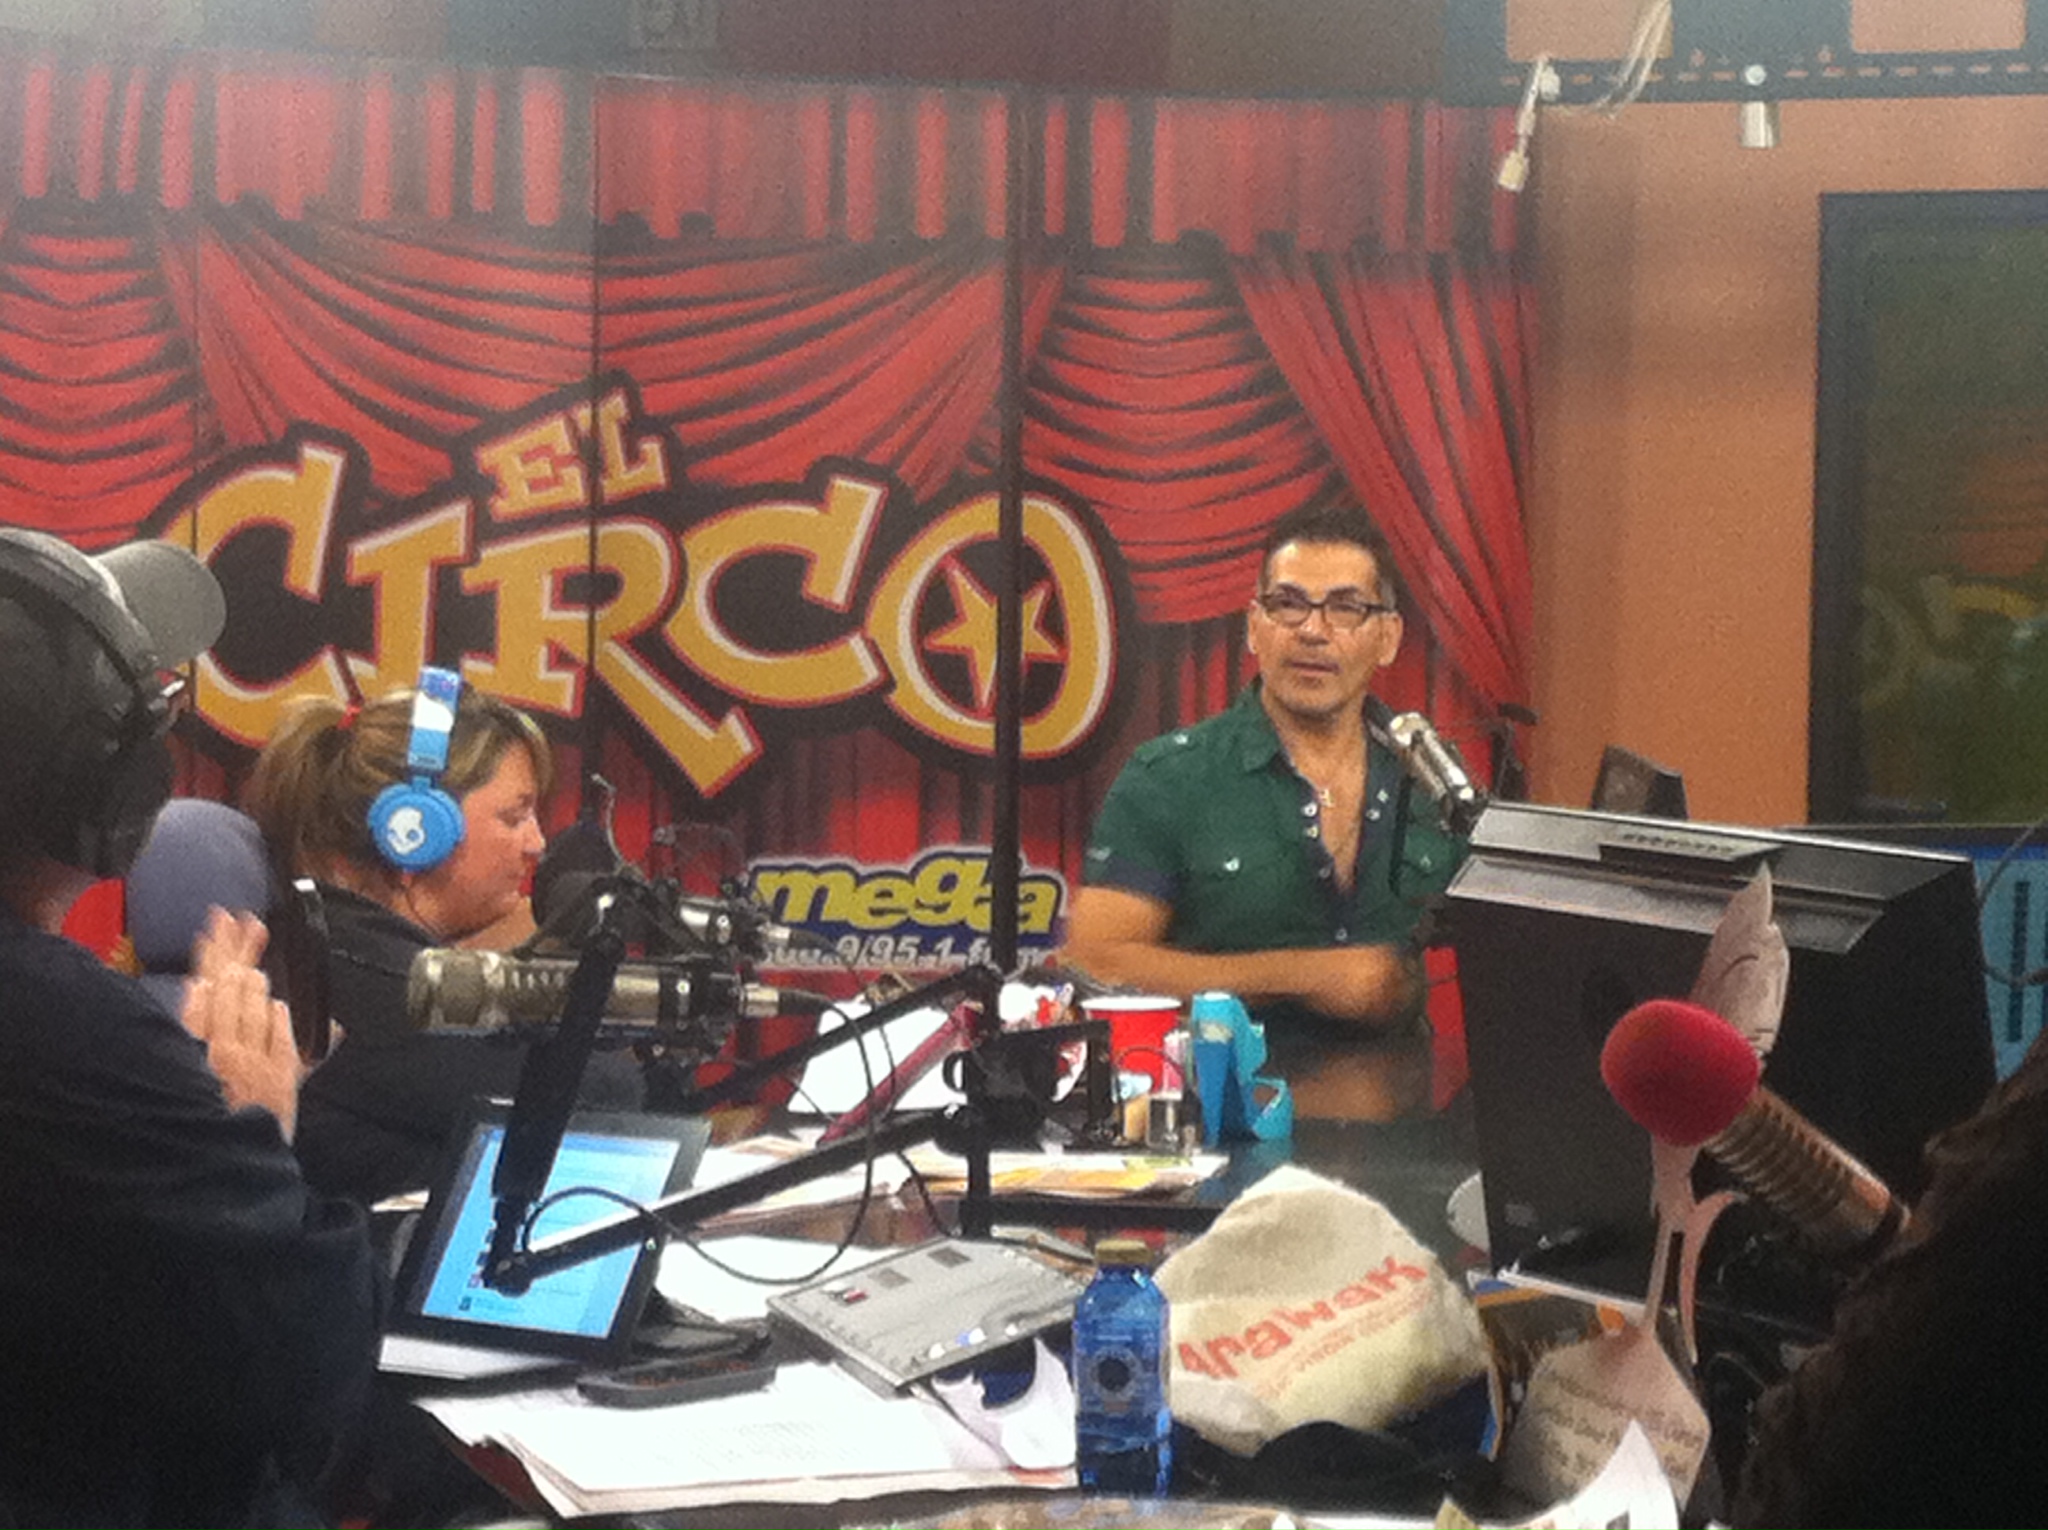 Being interviewed on the morning radio show 